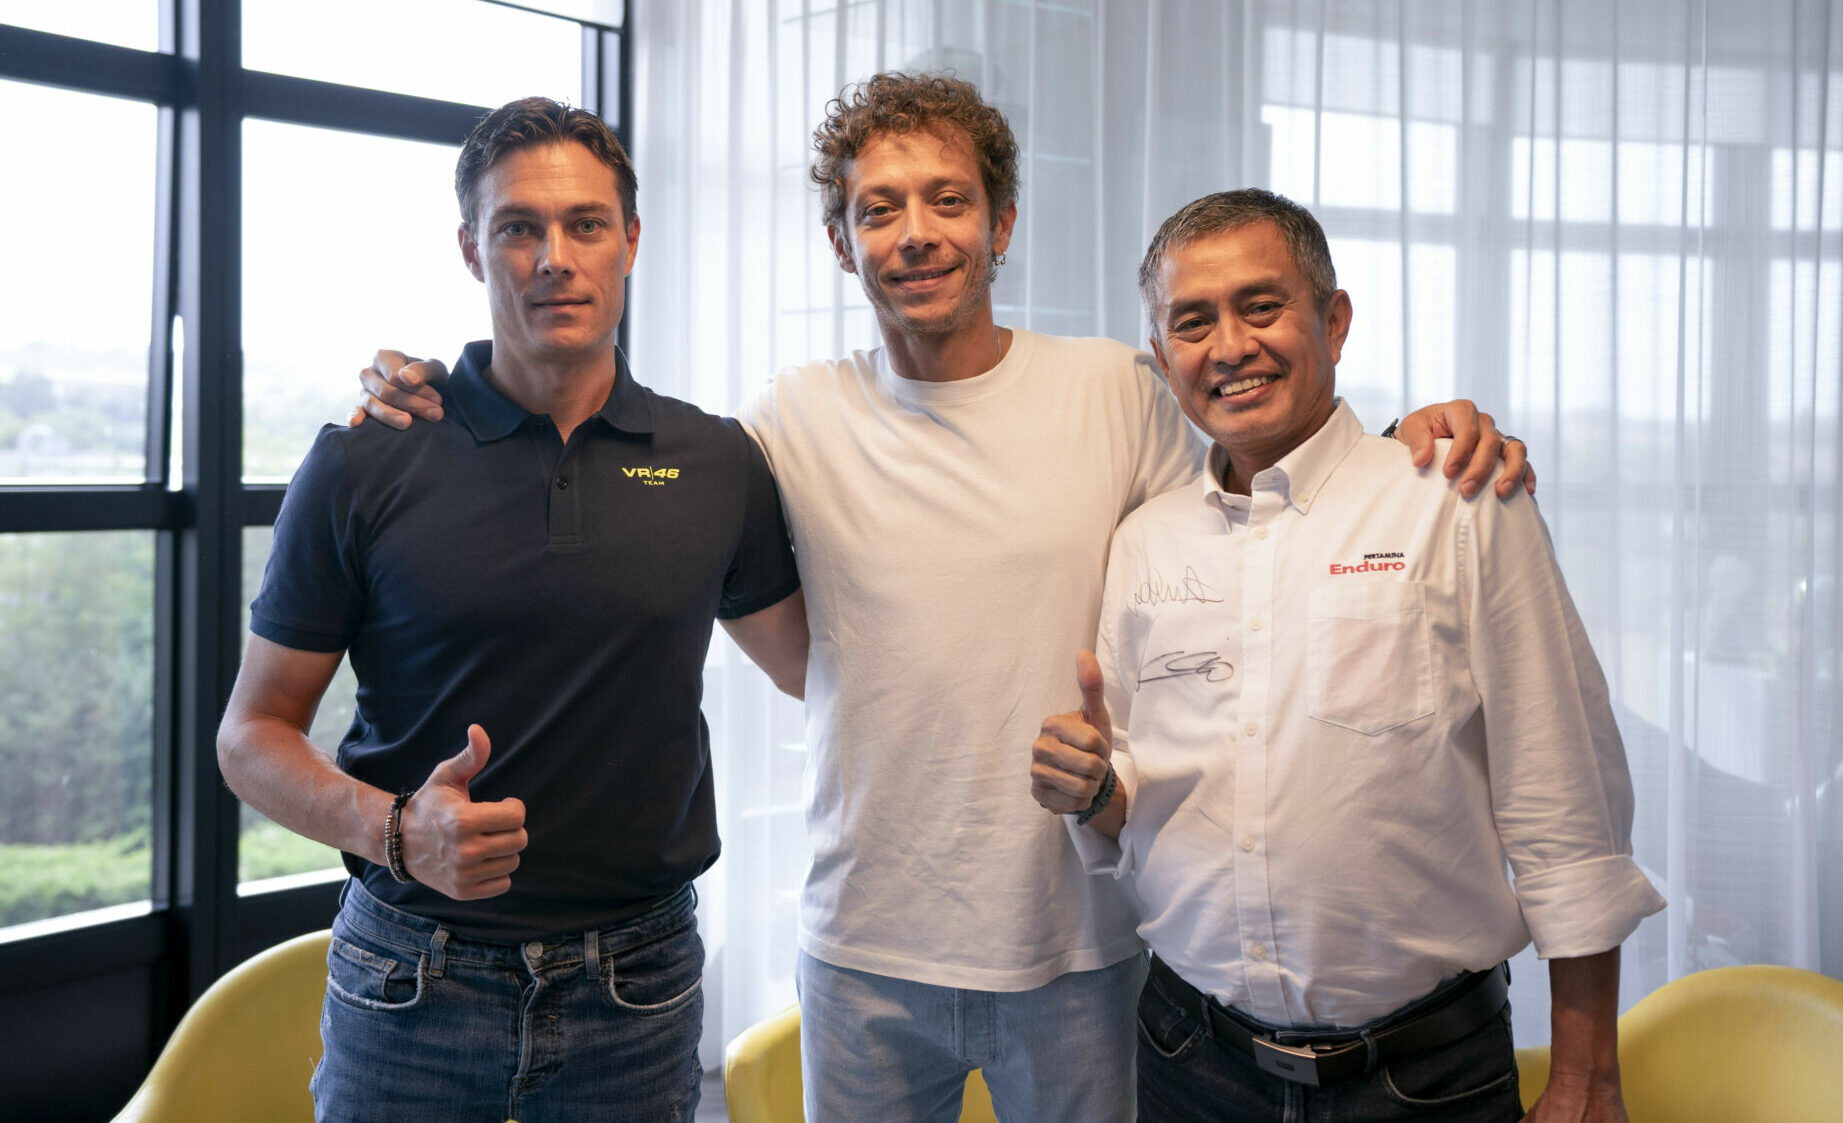 VR46 Racing Team owner Valentino Rossi (center) with Werry Prayogi, President Director of PT Pertamina Lubricants (right) and Gianluca Falcioni, CEO of the VR46 Agency (left). Photo courtesy VR46 Racing Team.